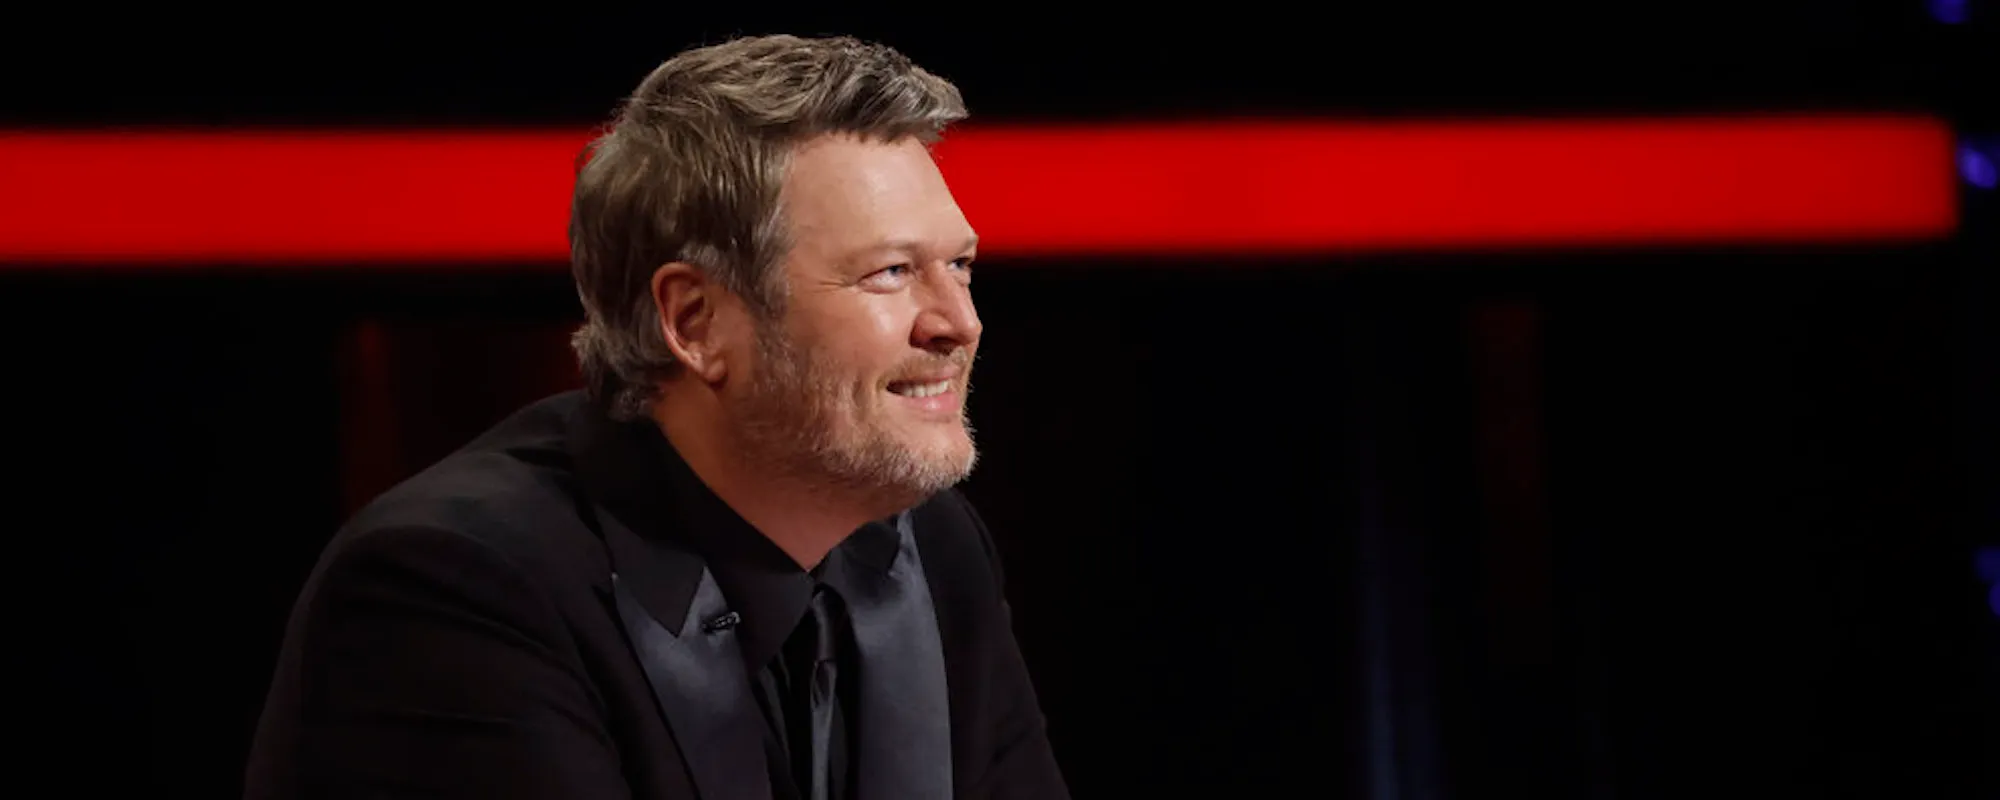 Blake Shelton Receives Star-Studded Send-Off After 23 Seasons on ‘The Voice’